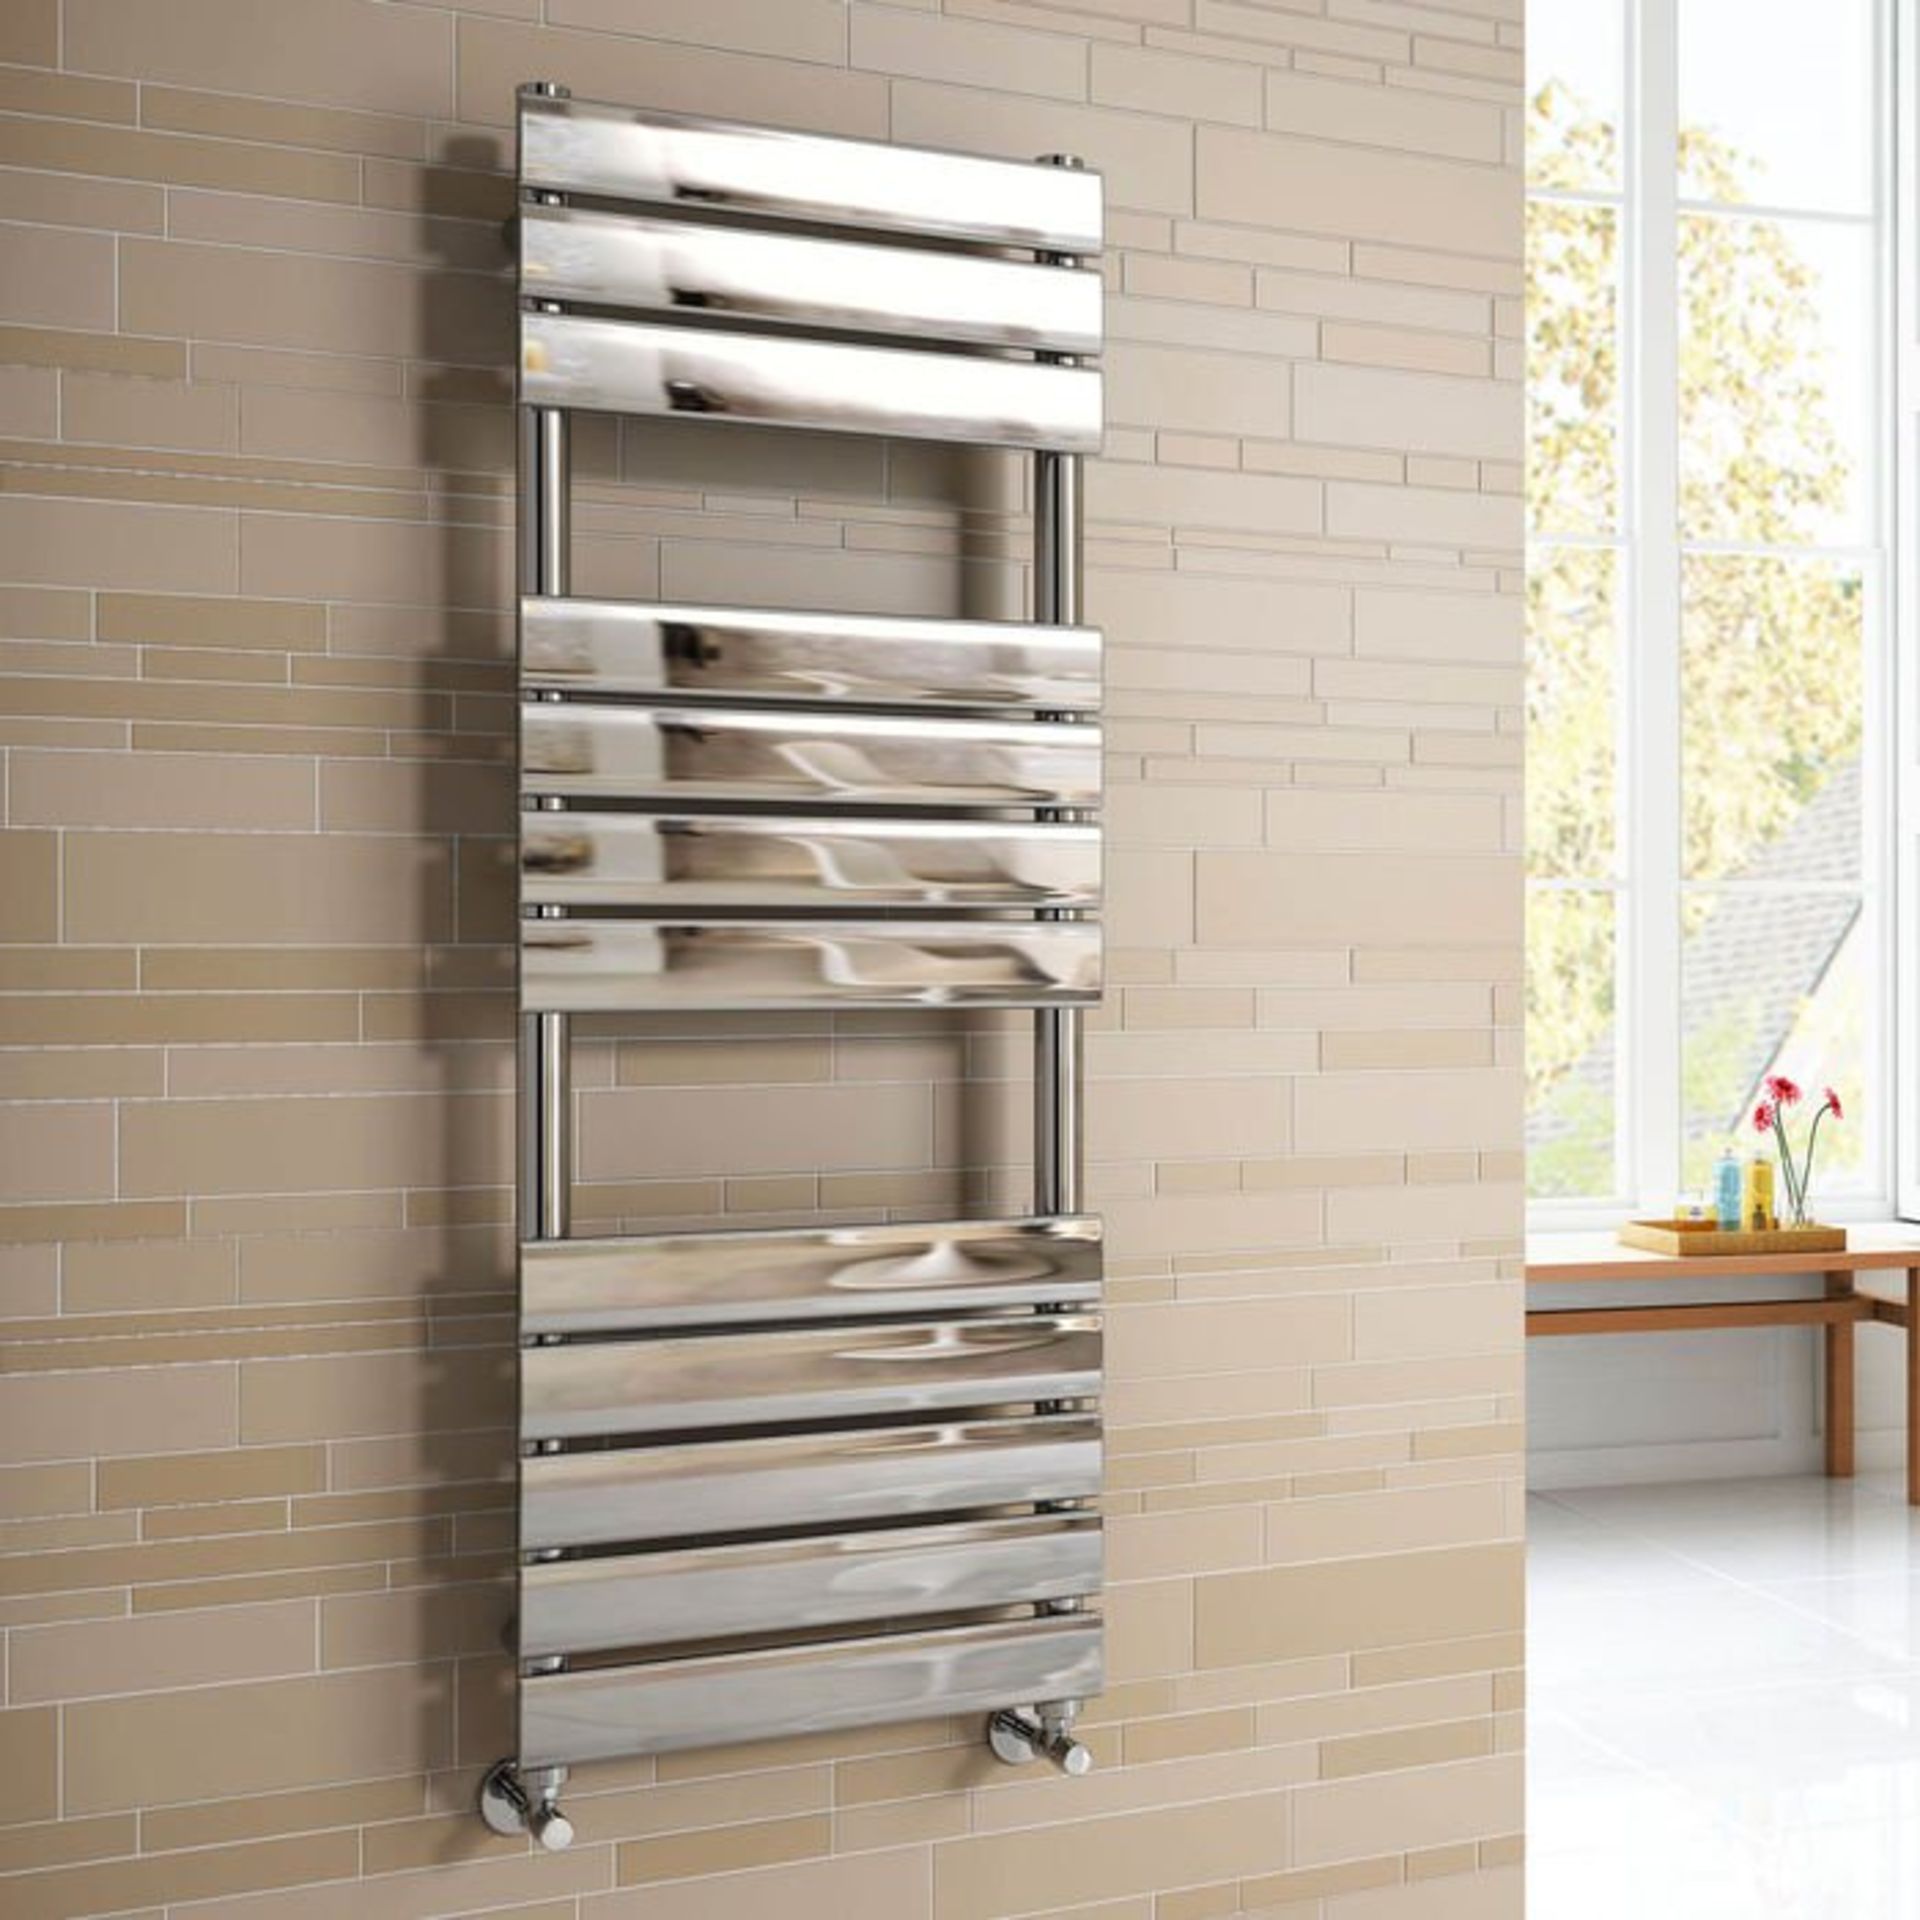 (H6) 1200x450mm Chrome Flat Panel Ladder Towel Radiator RRP £360.99 We love this because the large